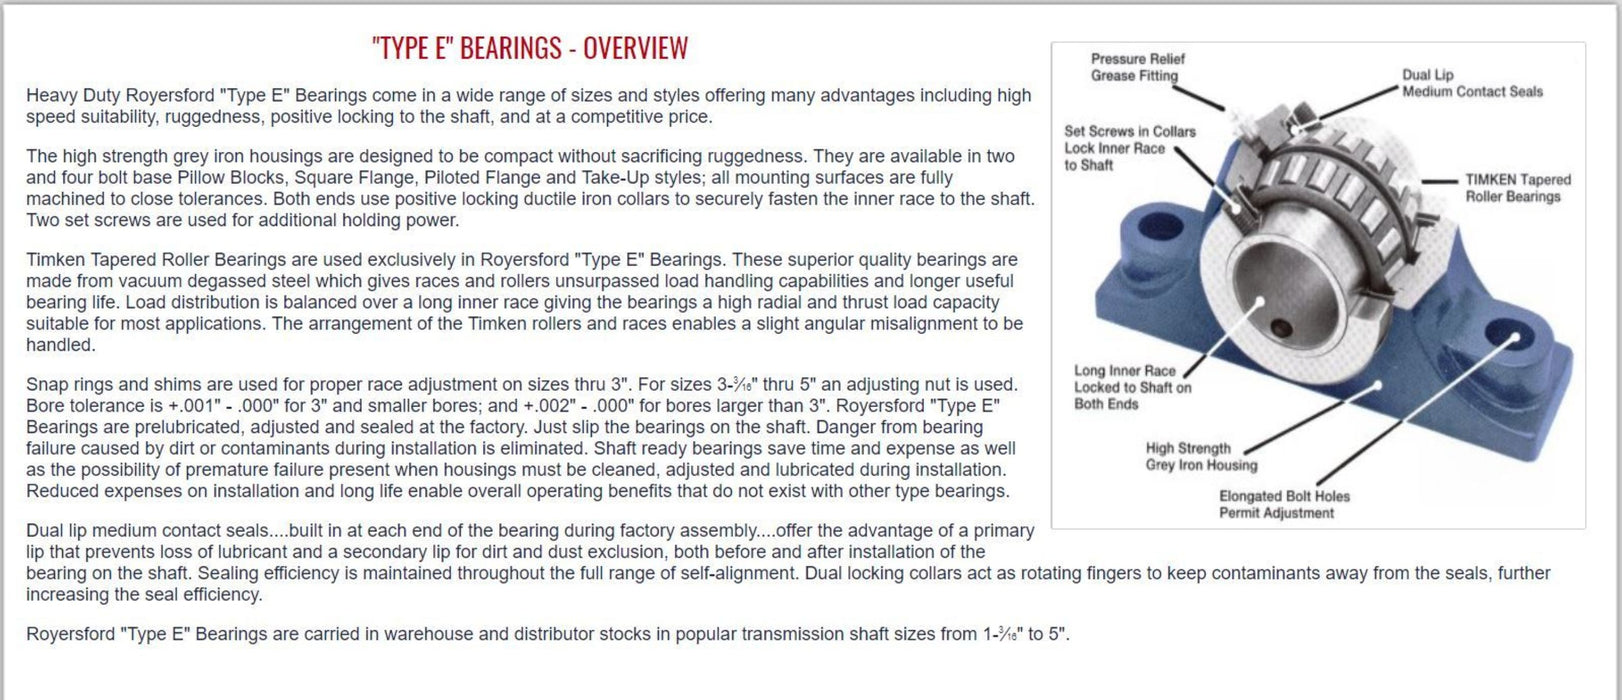 20-05-0211, Royersford Type E 4 Bolt Square Flange Bearing, 2-11/16" with Timken Tapered Roller Bearings